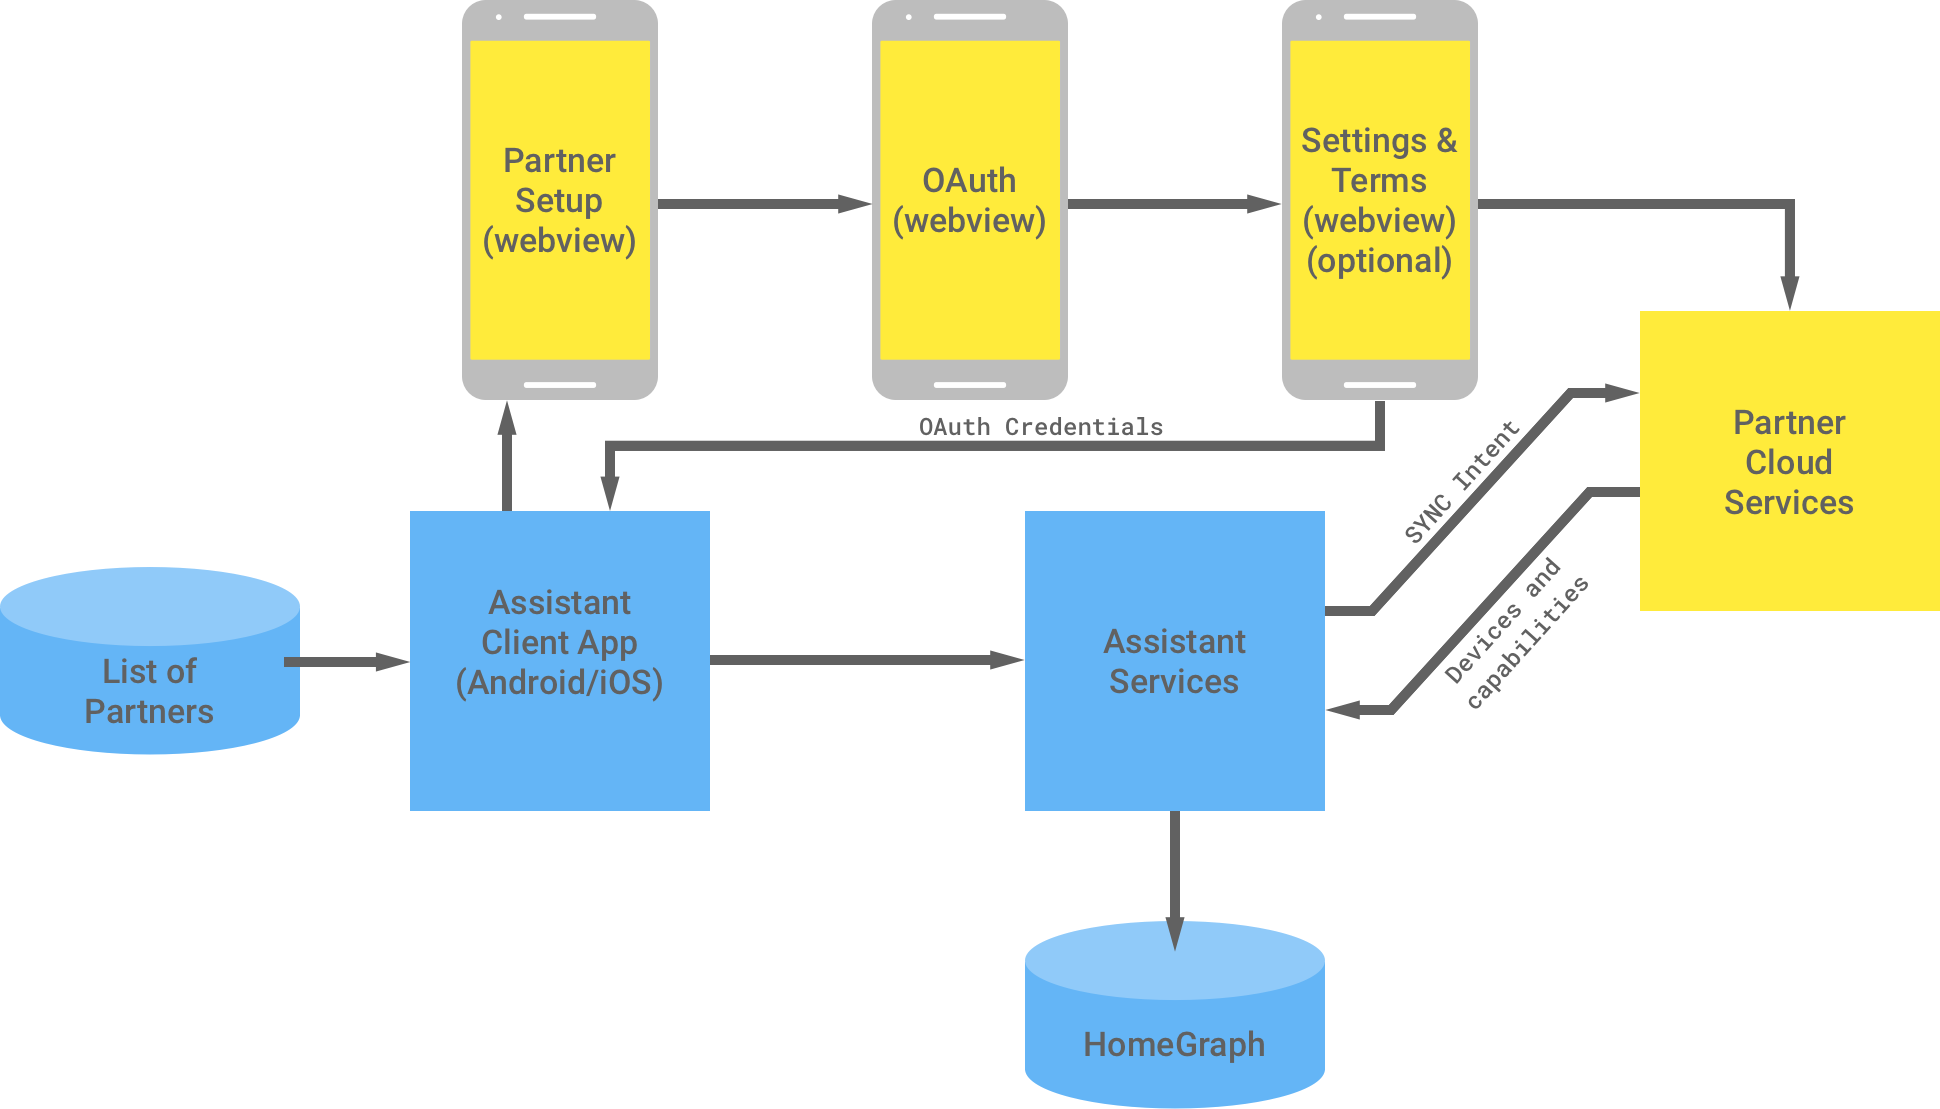 This figure shows the interaction between the Google infrastructure
    and the partner infrastructure. From the Google infrastructure there is a
    list of partners that is available to the Assistant client app, which then
    flows to the partner infrastructure to complete OAuth authentication. The OAuth
    authentication on the partner side is the partner setup webview, OAuth webview,
    optional settings ands terms, and partner cloud services. The partner infrastructure,
    then returns the OAuth credentials to the Assistant client app. The partner
    cloud services sends available devices and capabilities to Assistant services,
    which then stores the information in the Home Graph.